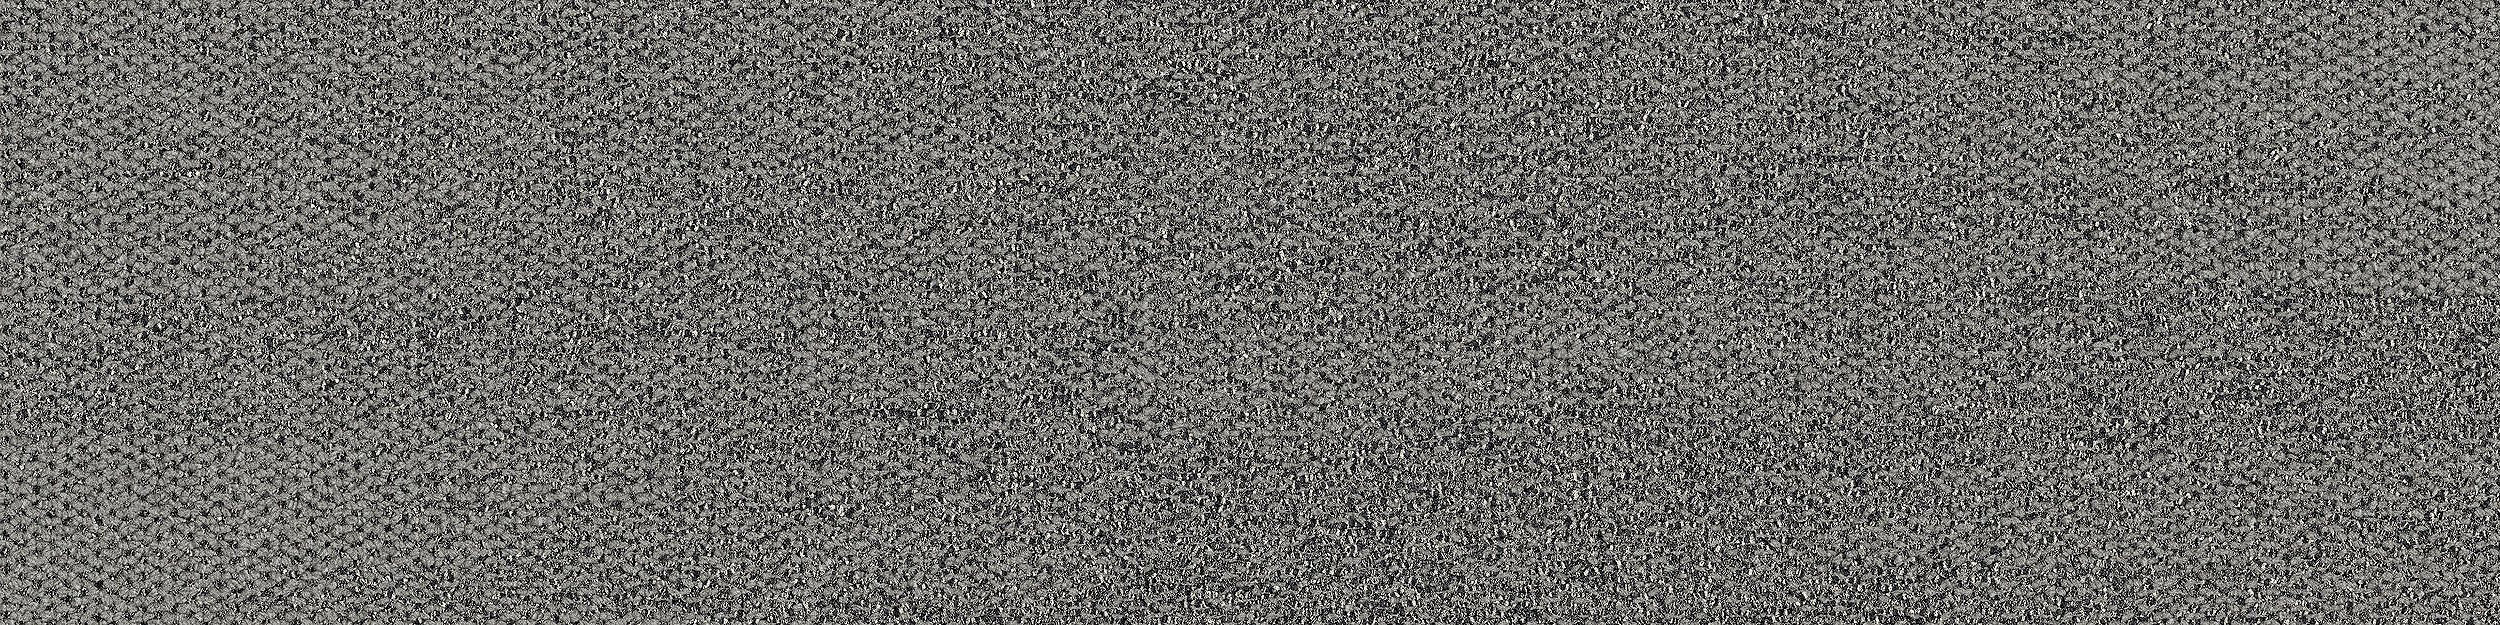 Open Air 410 Carpet Tile In Flannel image number 5